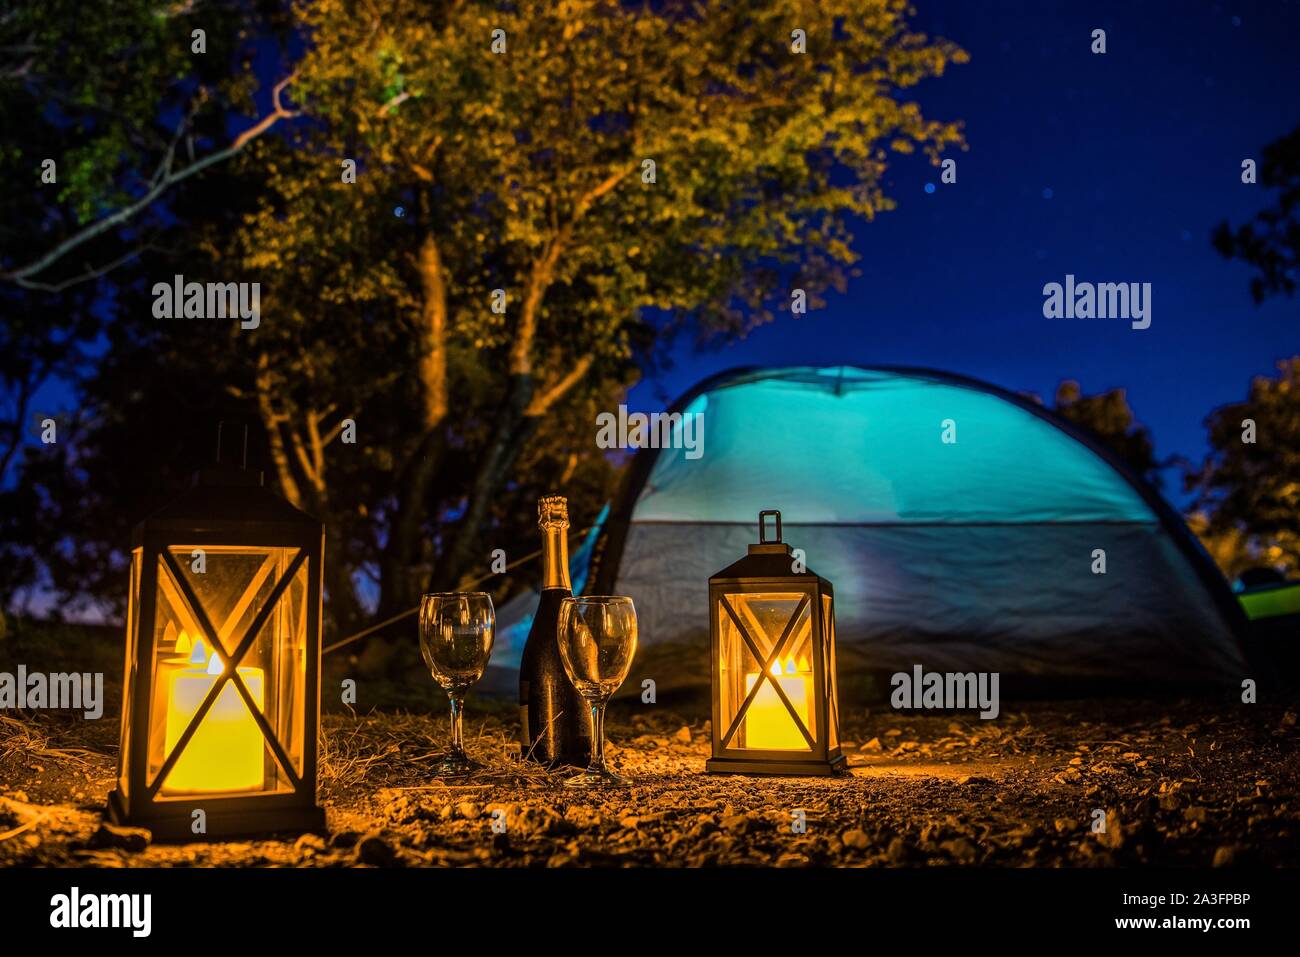 Romantic Camping Night with Bottle of Good Prosecco, Two Glasses, Candle Lanterns and Starry Night. Scenic Getaway with Extras. Stock Photo